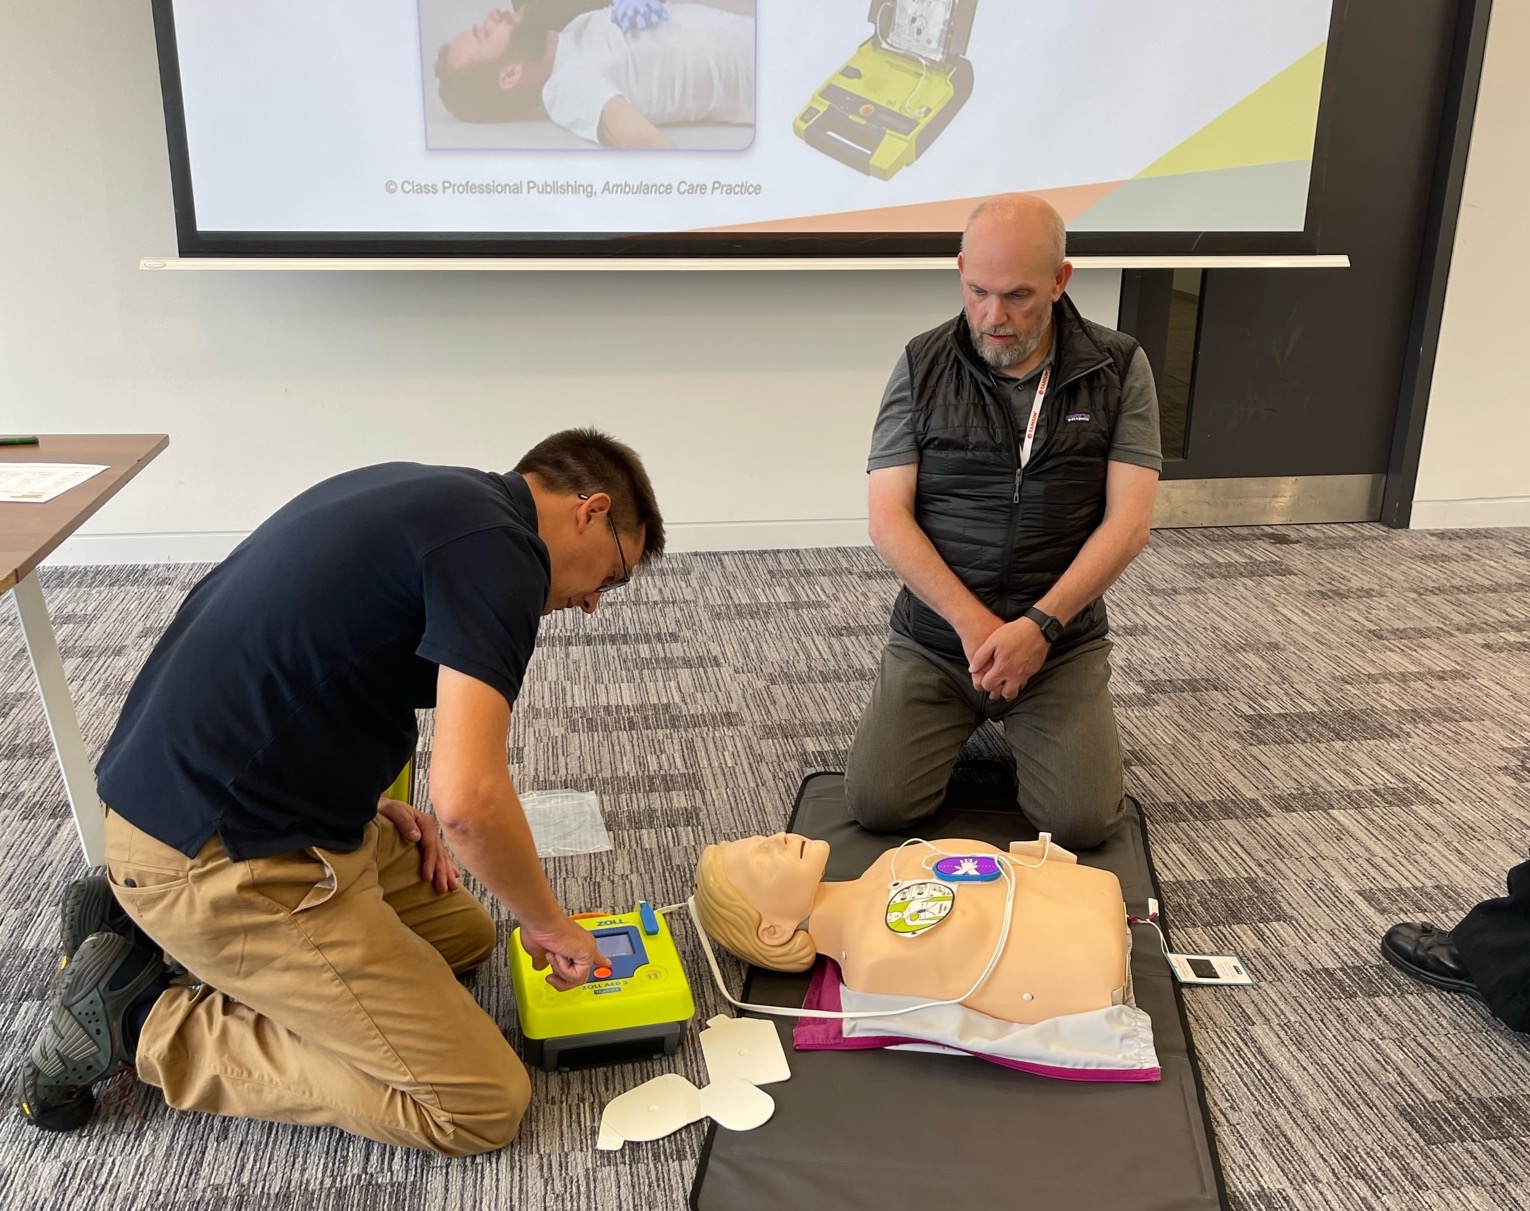 Two members of Tanium’s UK team practicing CPR on a CPR manikin